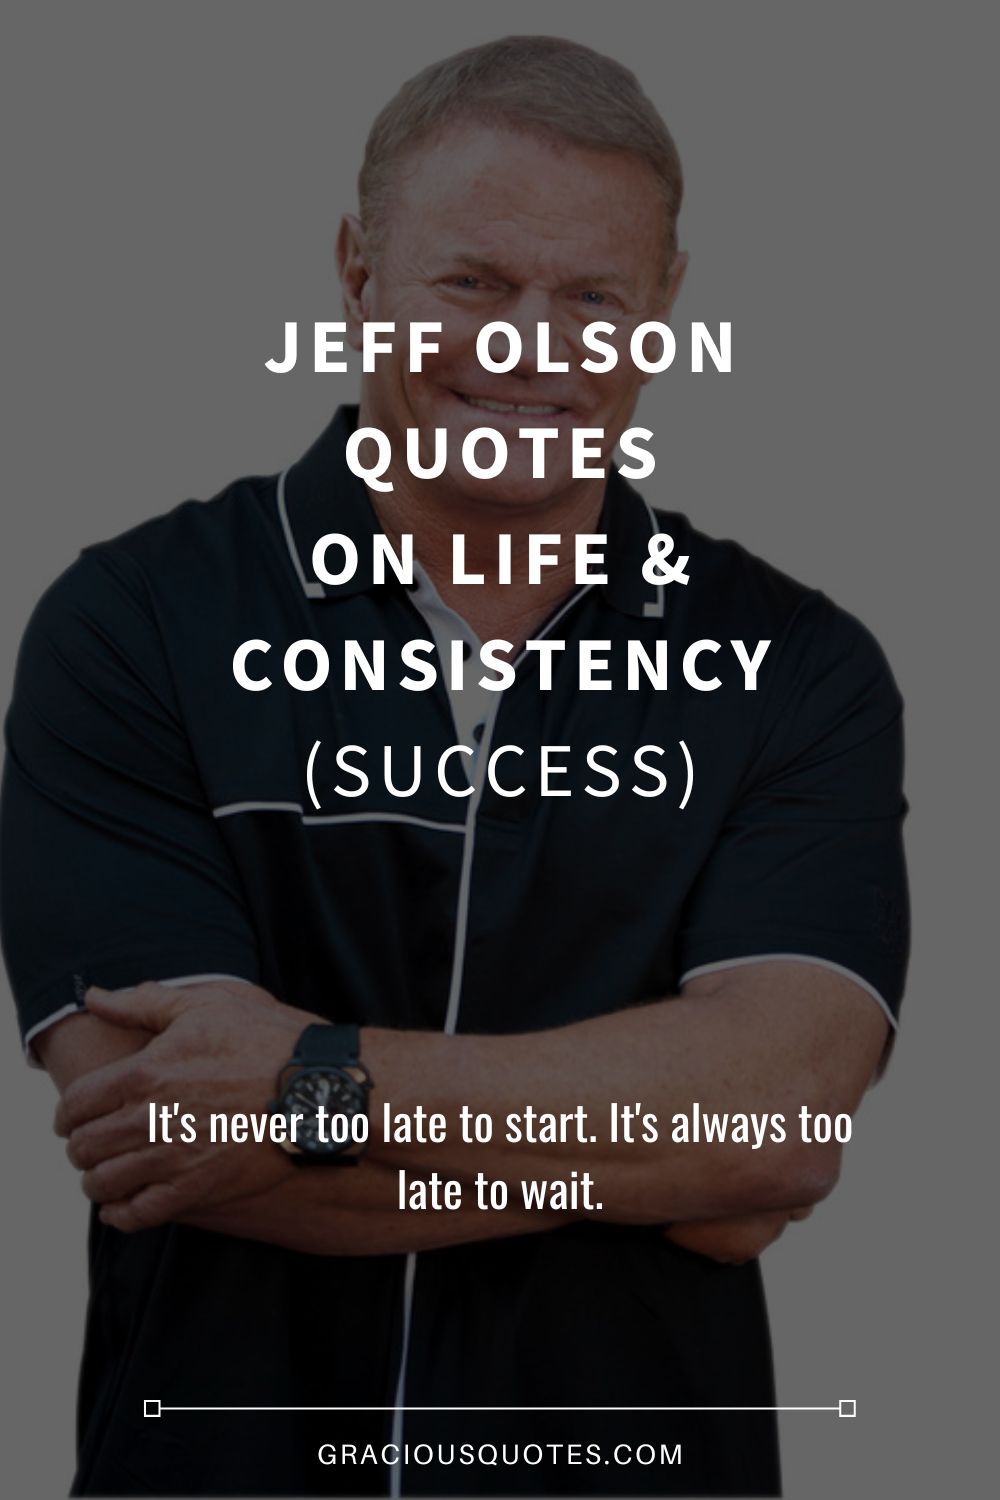 Jeff Olson Quotes on Life & Consistency (SUCCESS) - Gracious Quotes